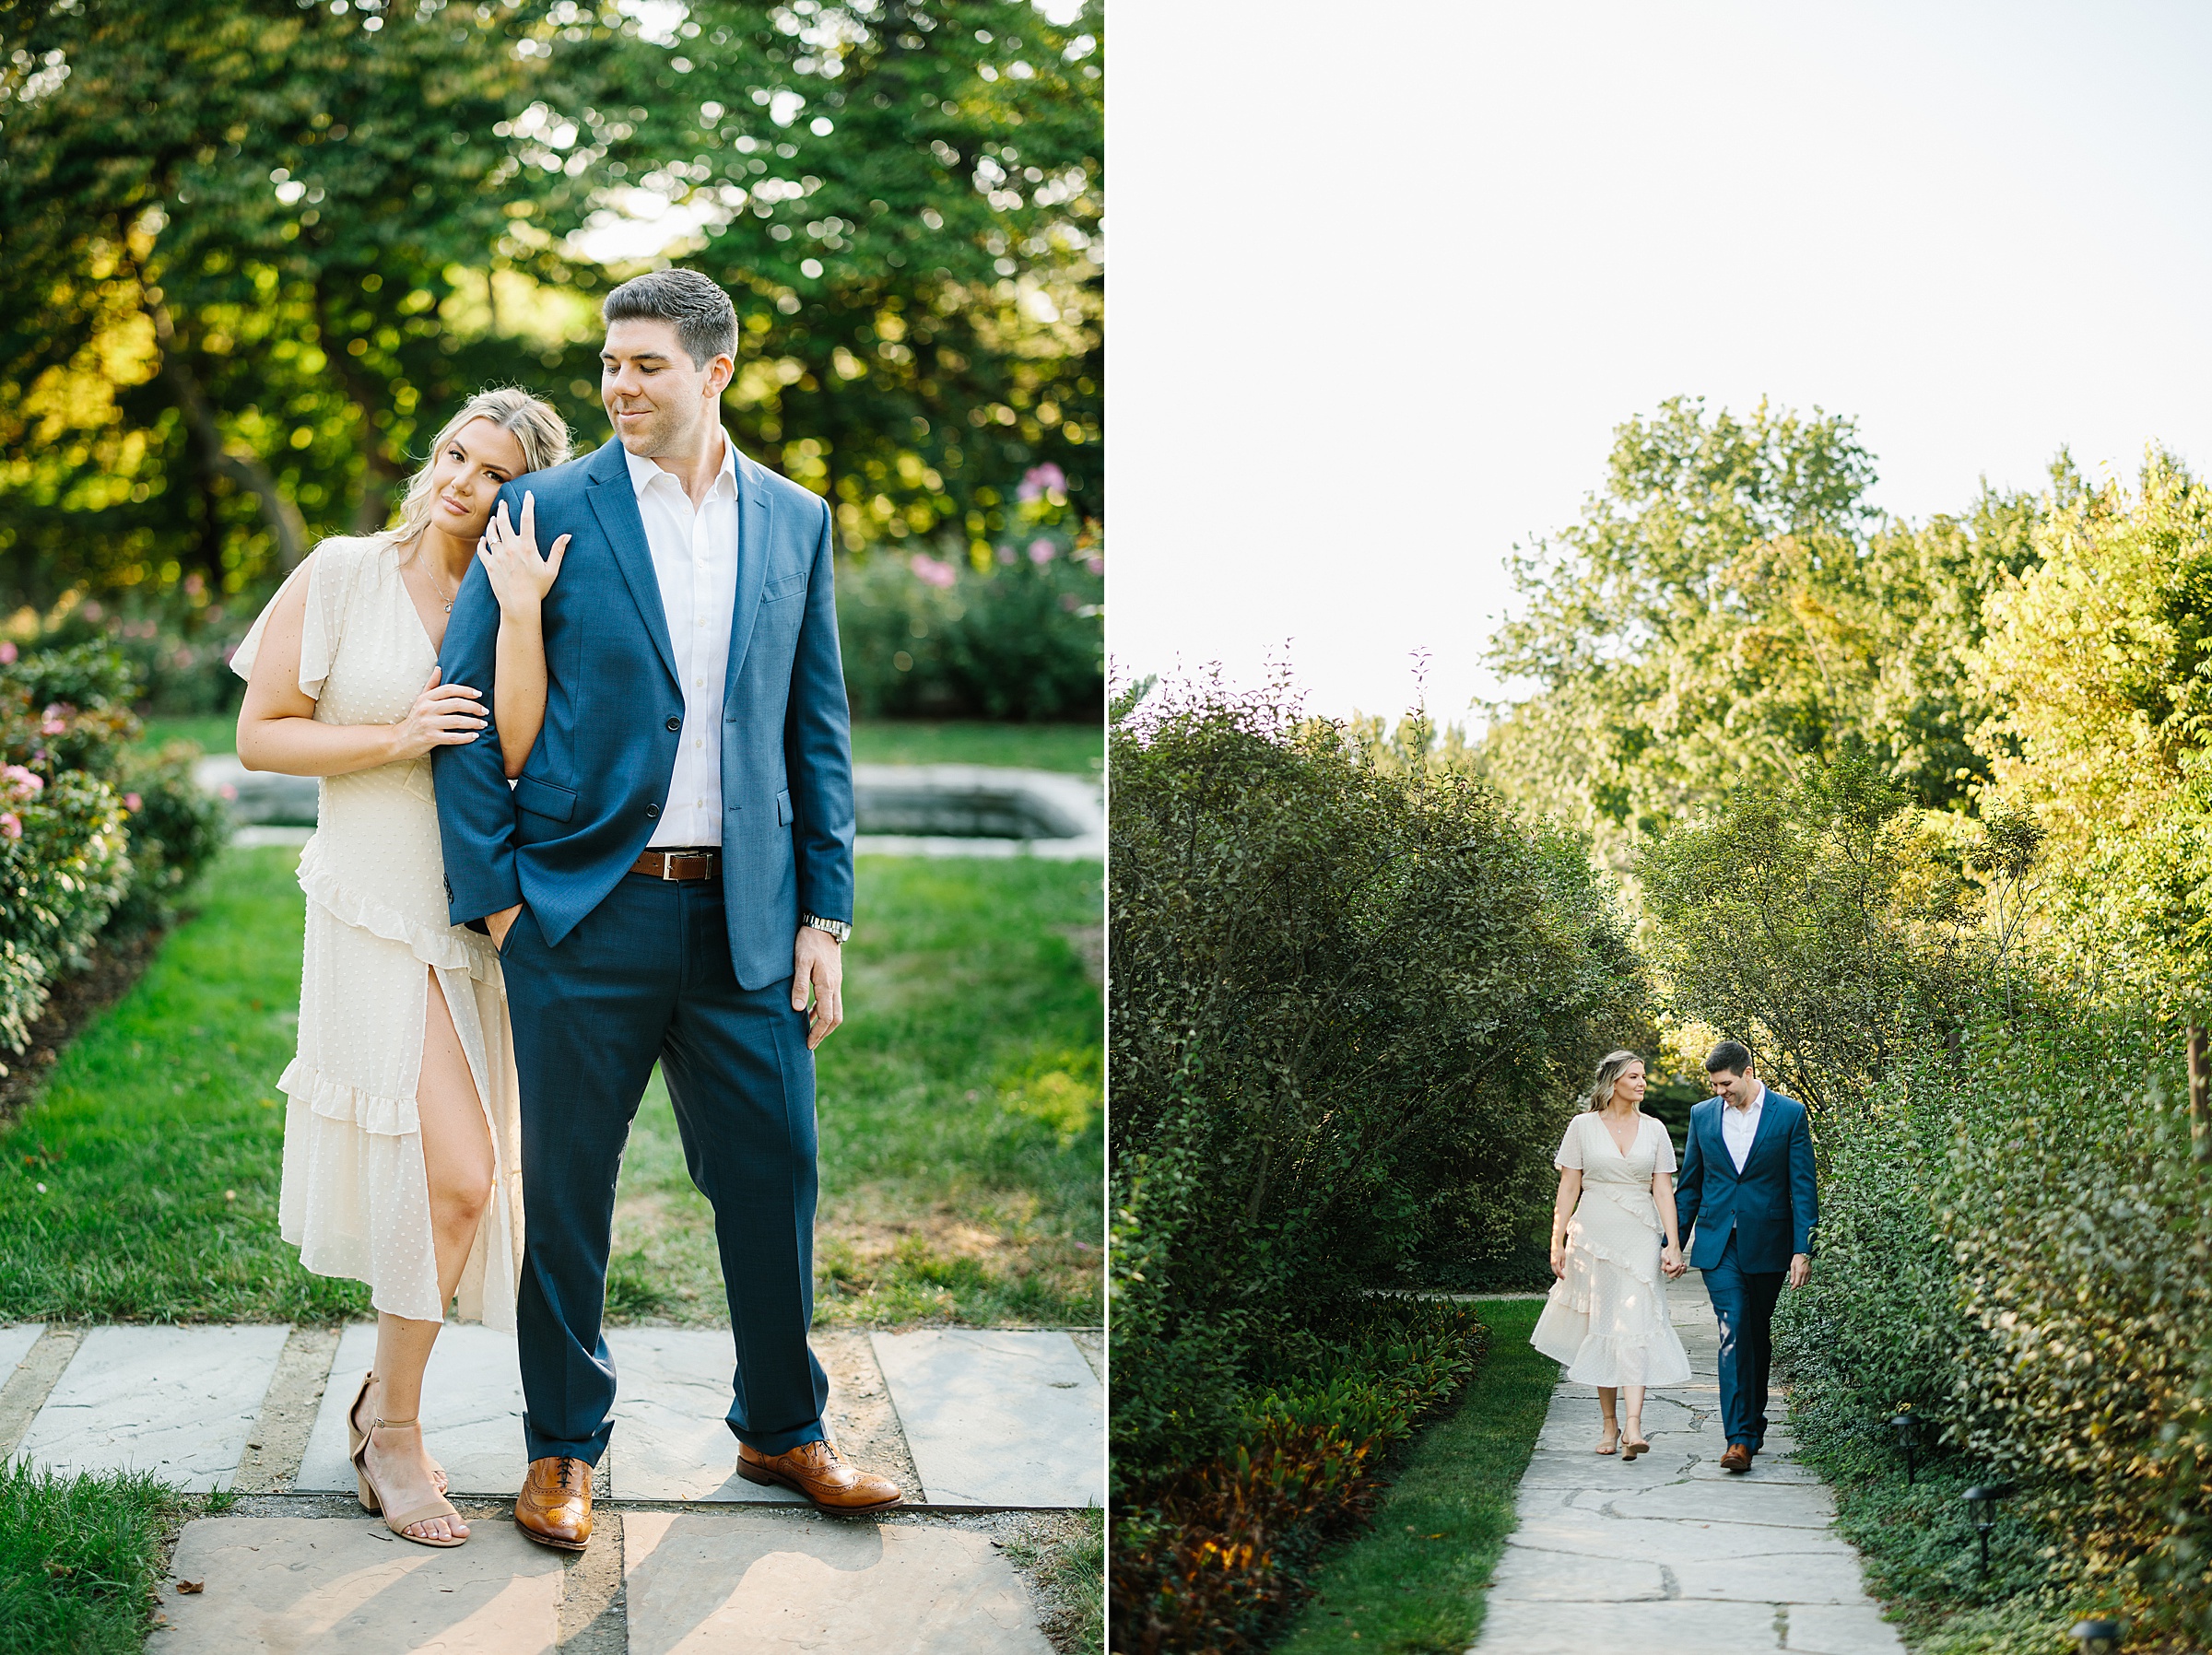 Future bride comes up from behind and holds her fiancé's arm; engaged couple takes a stroll while holding hands by Detroit Wedding Photographer Michele Maloney